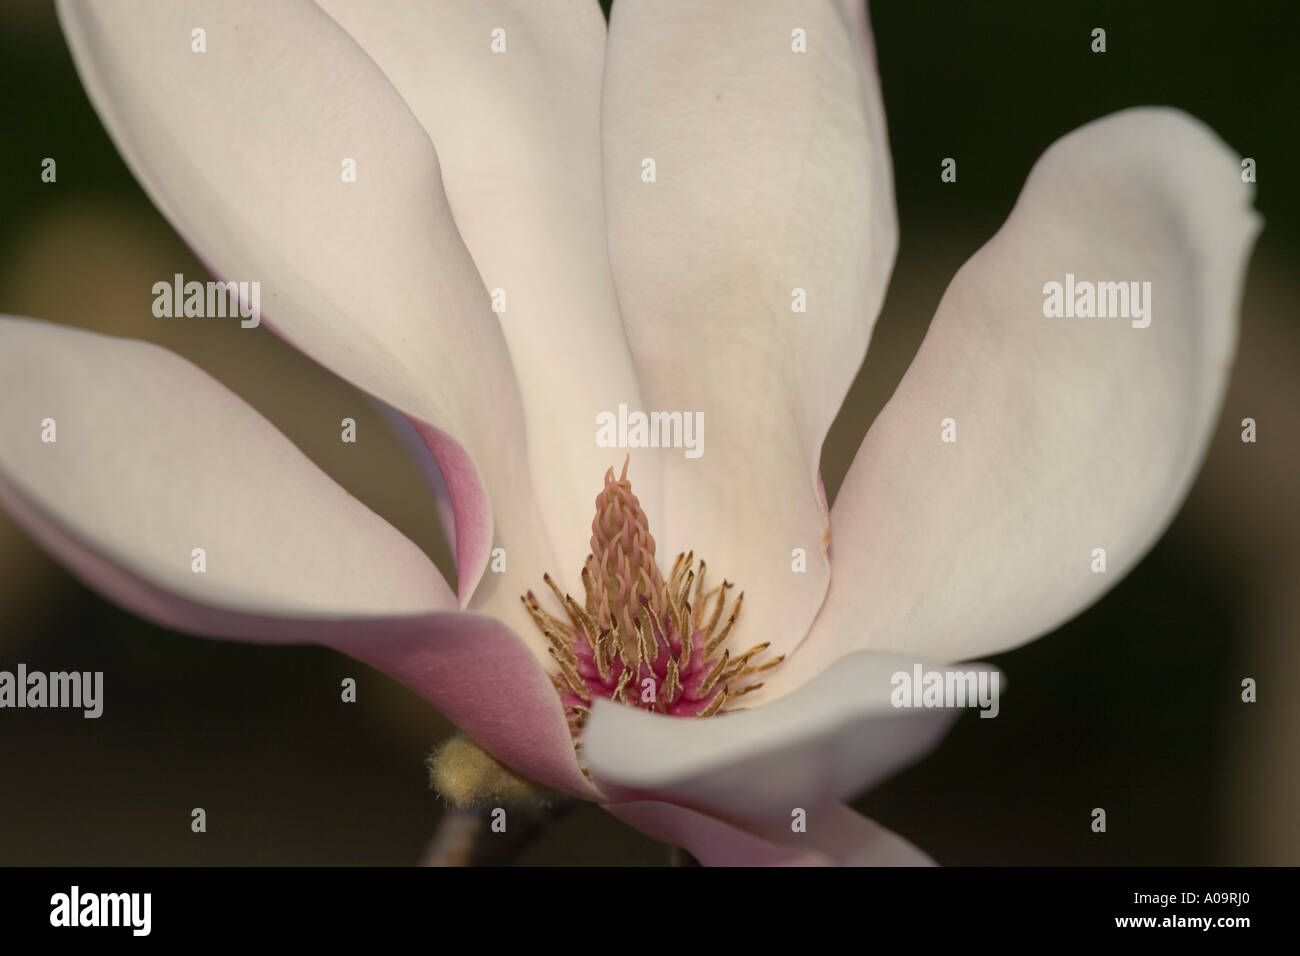 Southern Magnolia Blossom in Central Park Stock Photo